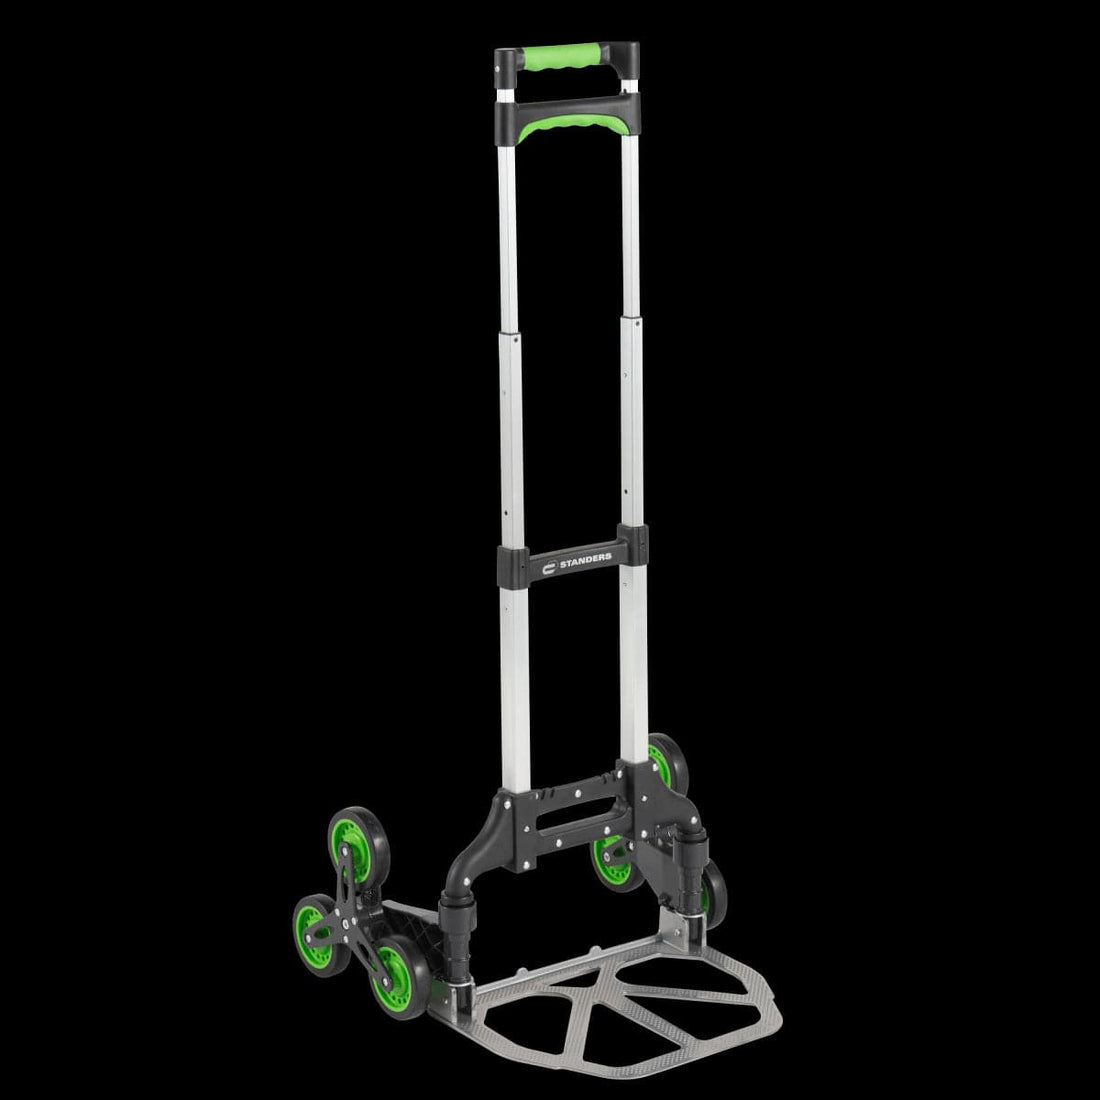 ALUMINIUM FOLDING STAIR TROLLEY STANDERS CAPACITY 70 KG WITH 3 WHEELS ON EACH SIDE - best price from Maltashopper.com BR410006570